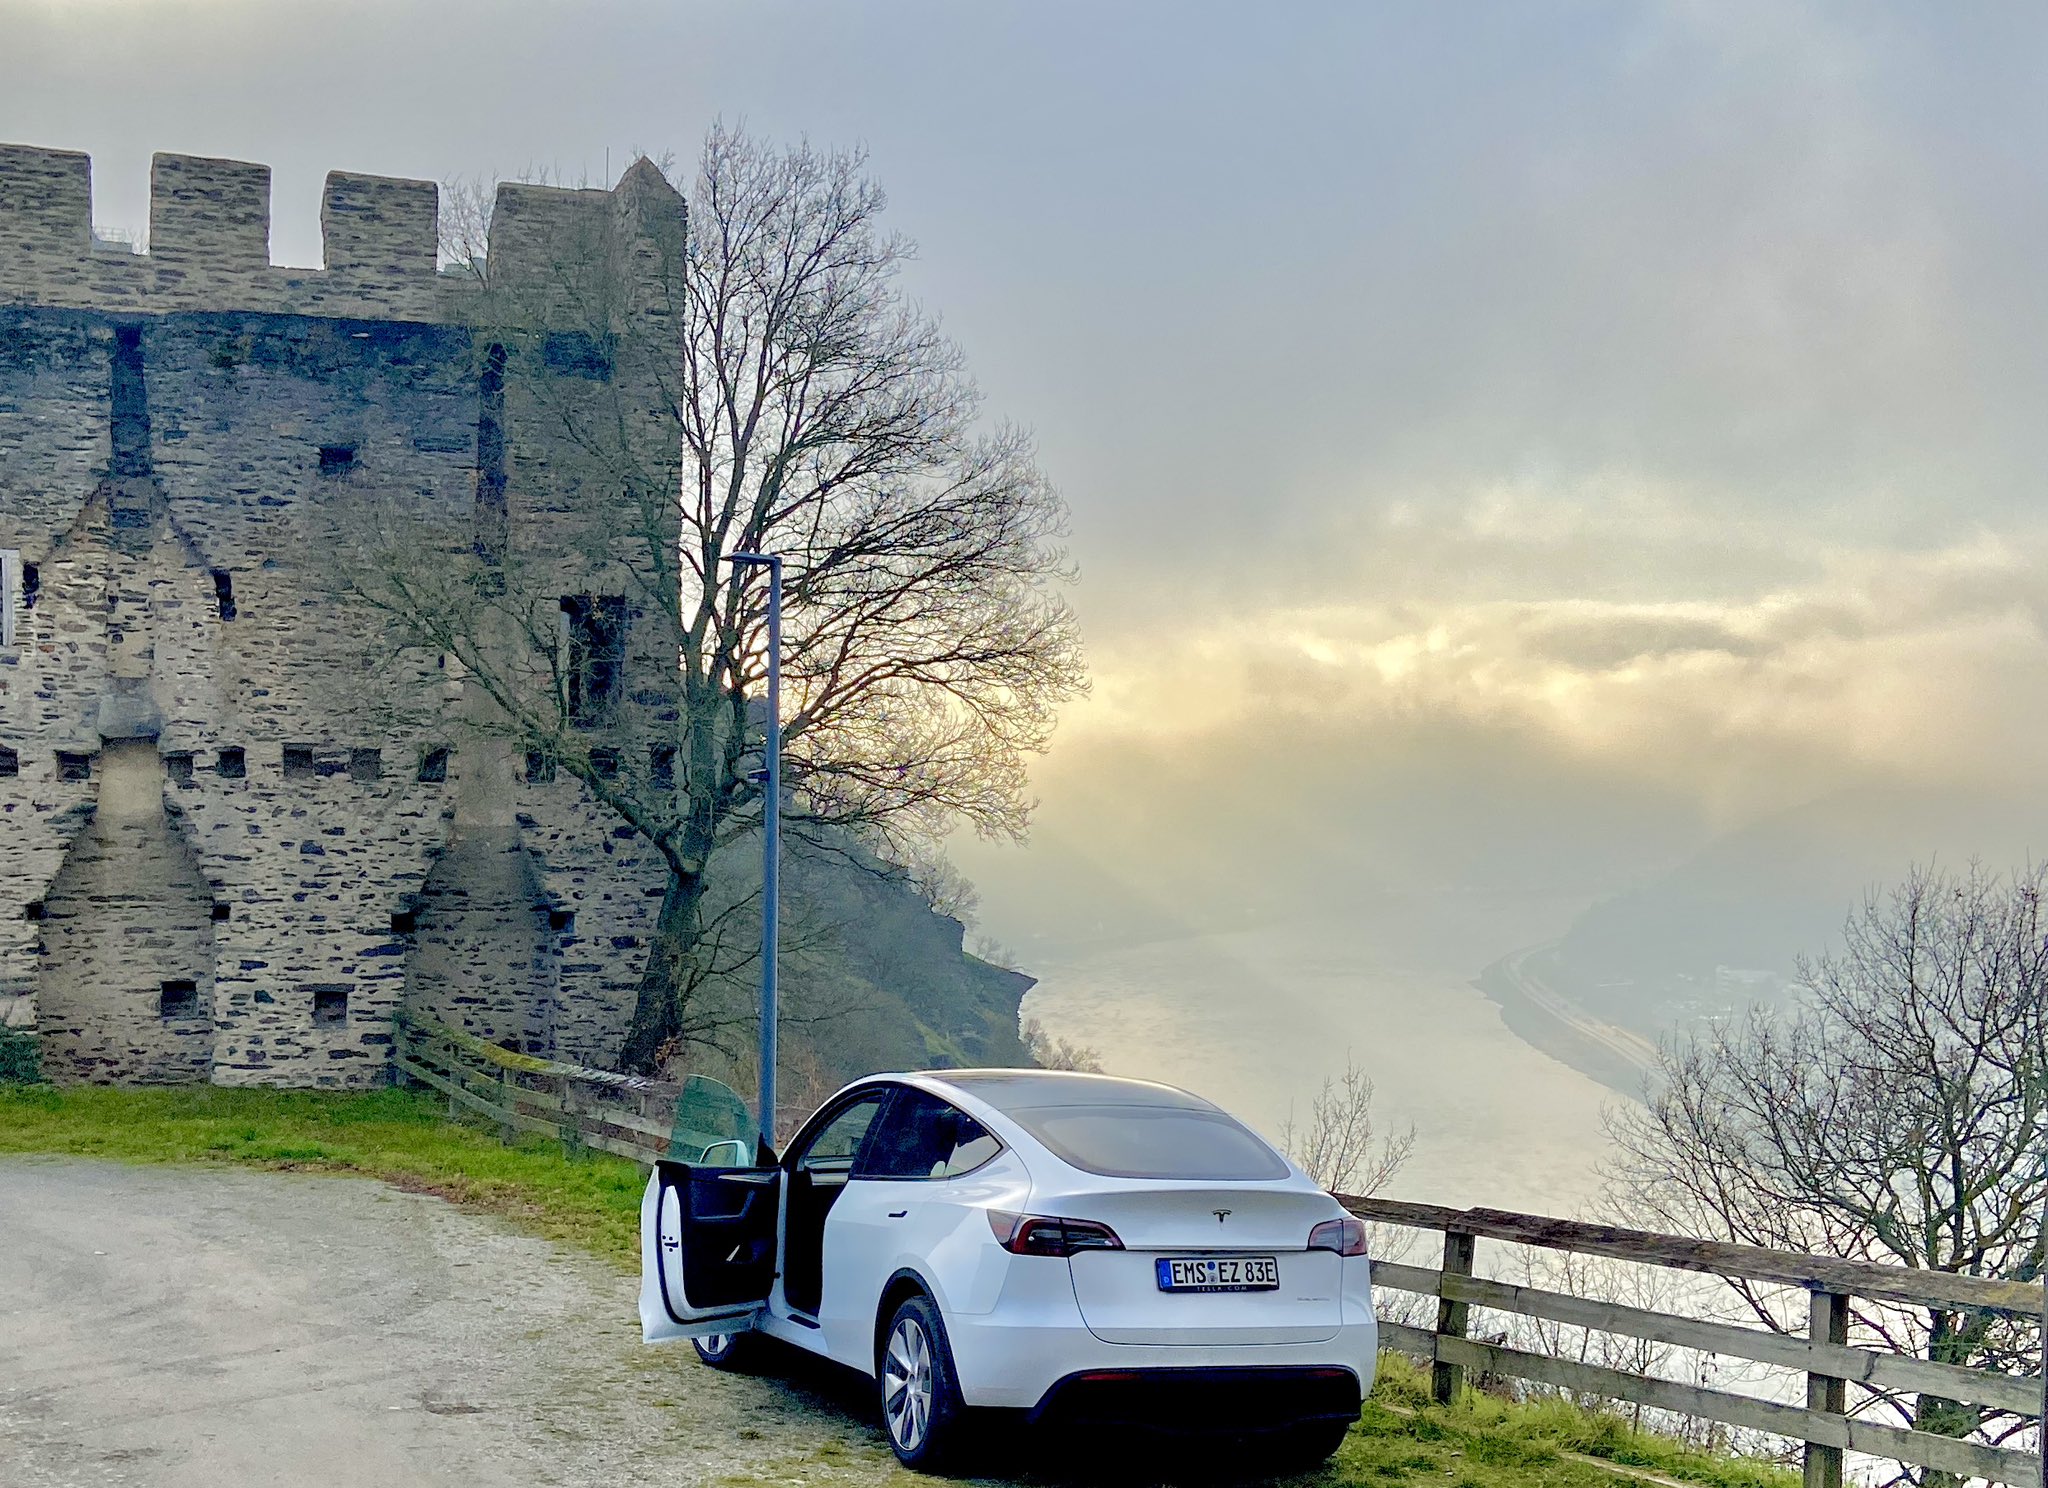 A Tesla owner takes a road trip to a castle image courtesy @memesofmars on Twitter